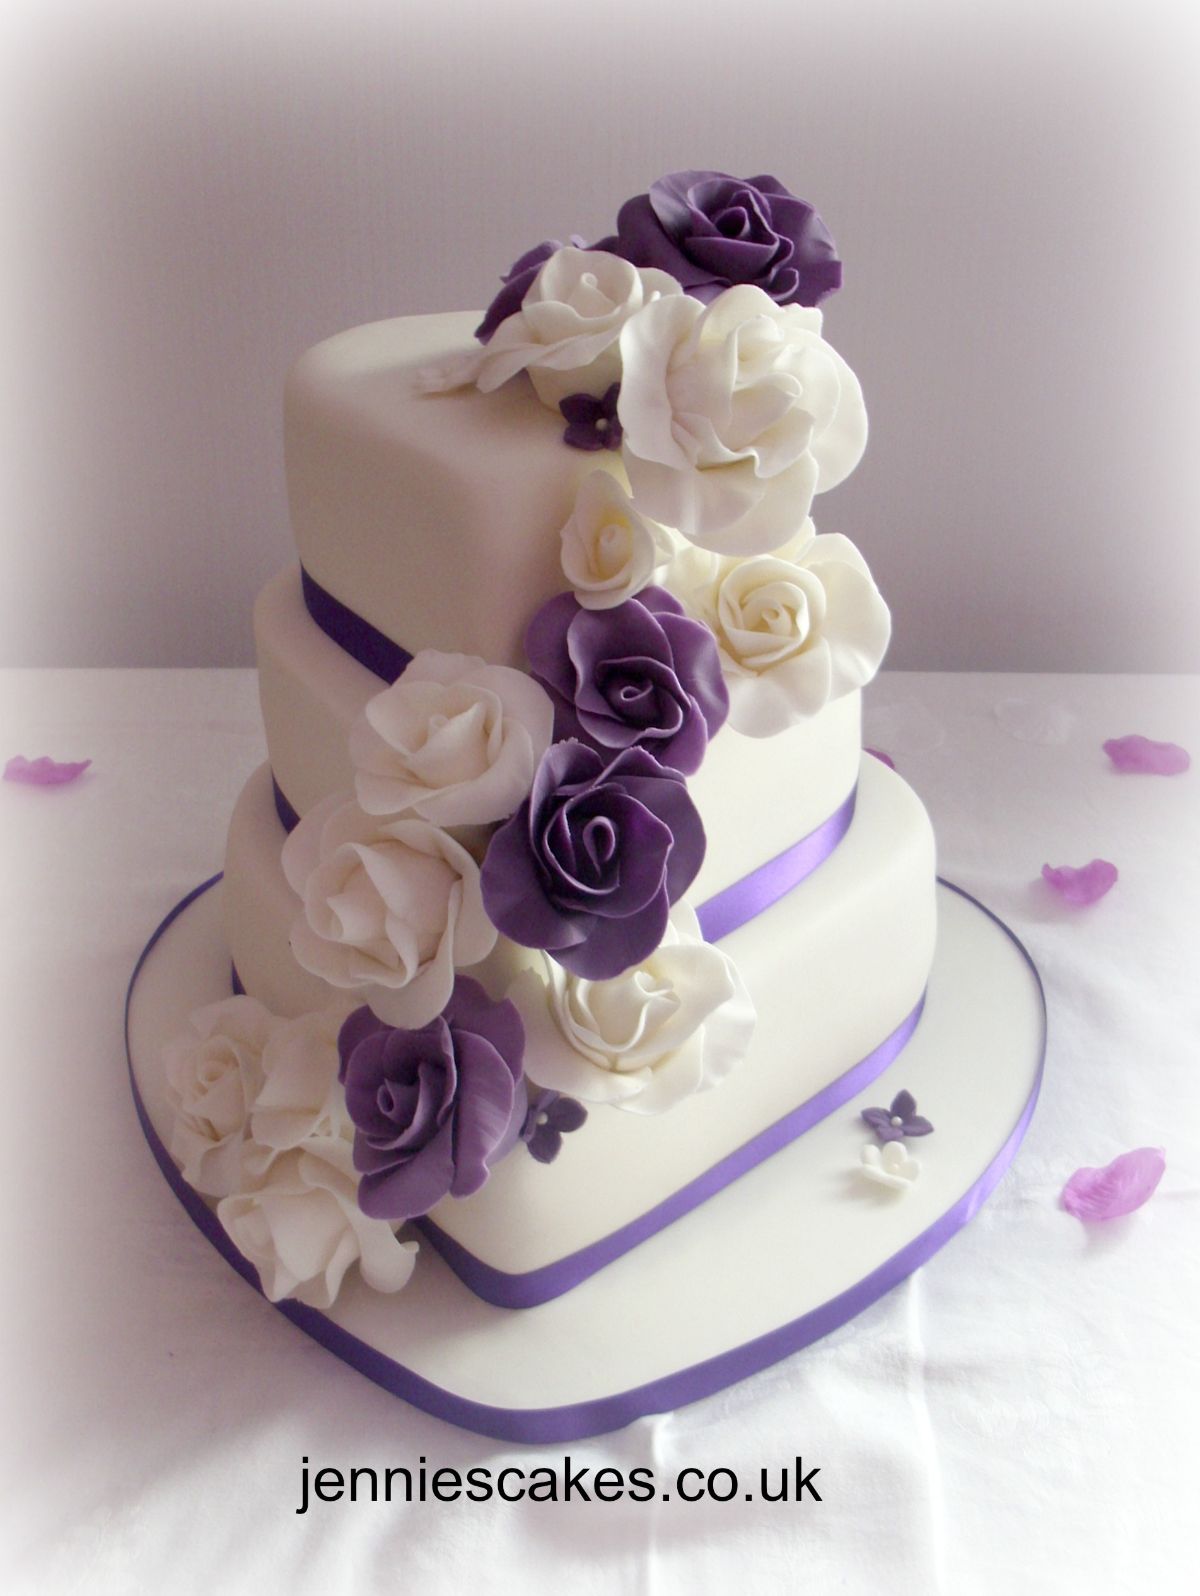 Jennie's cake's and catering-Image-55